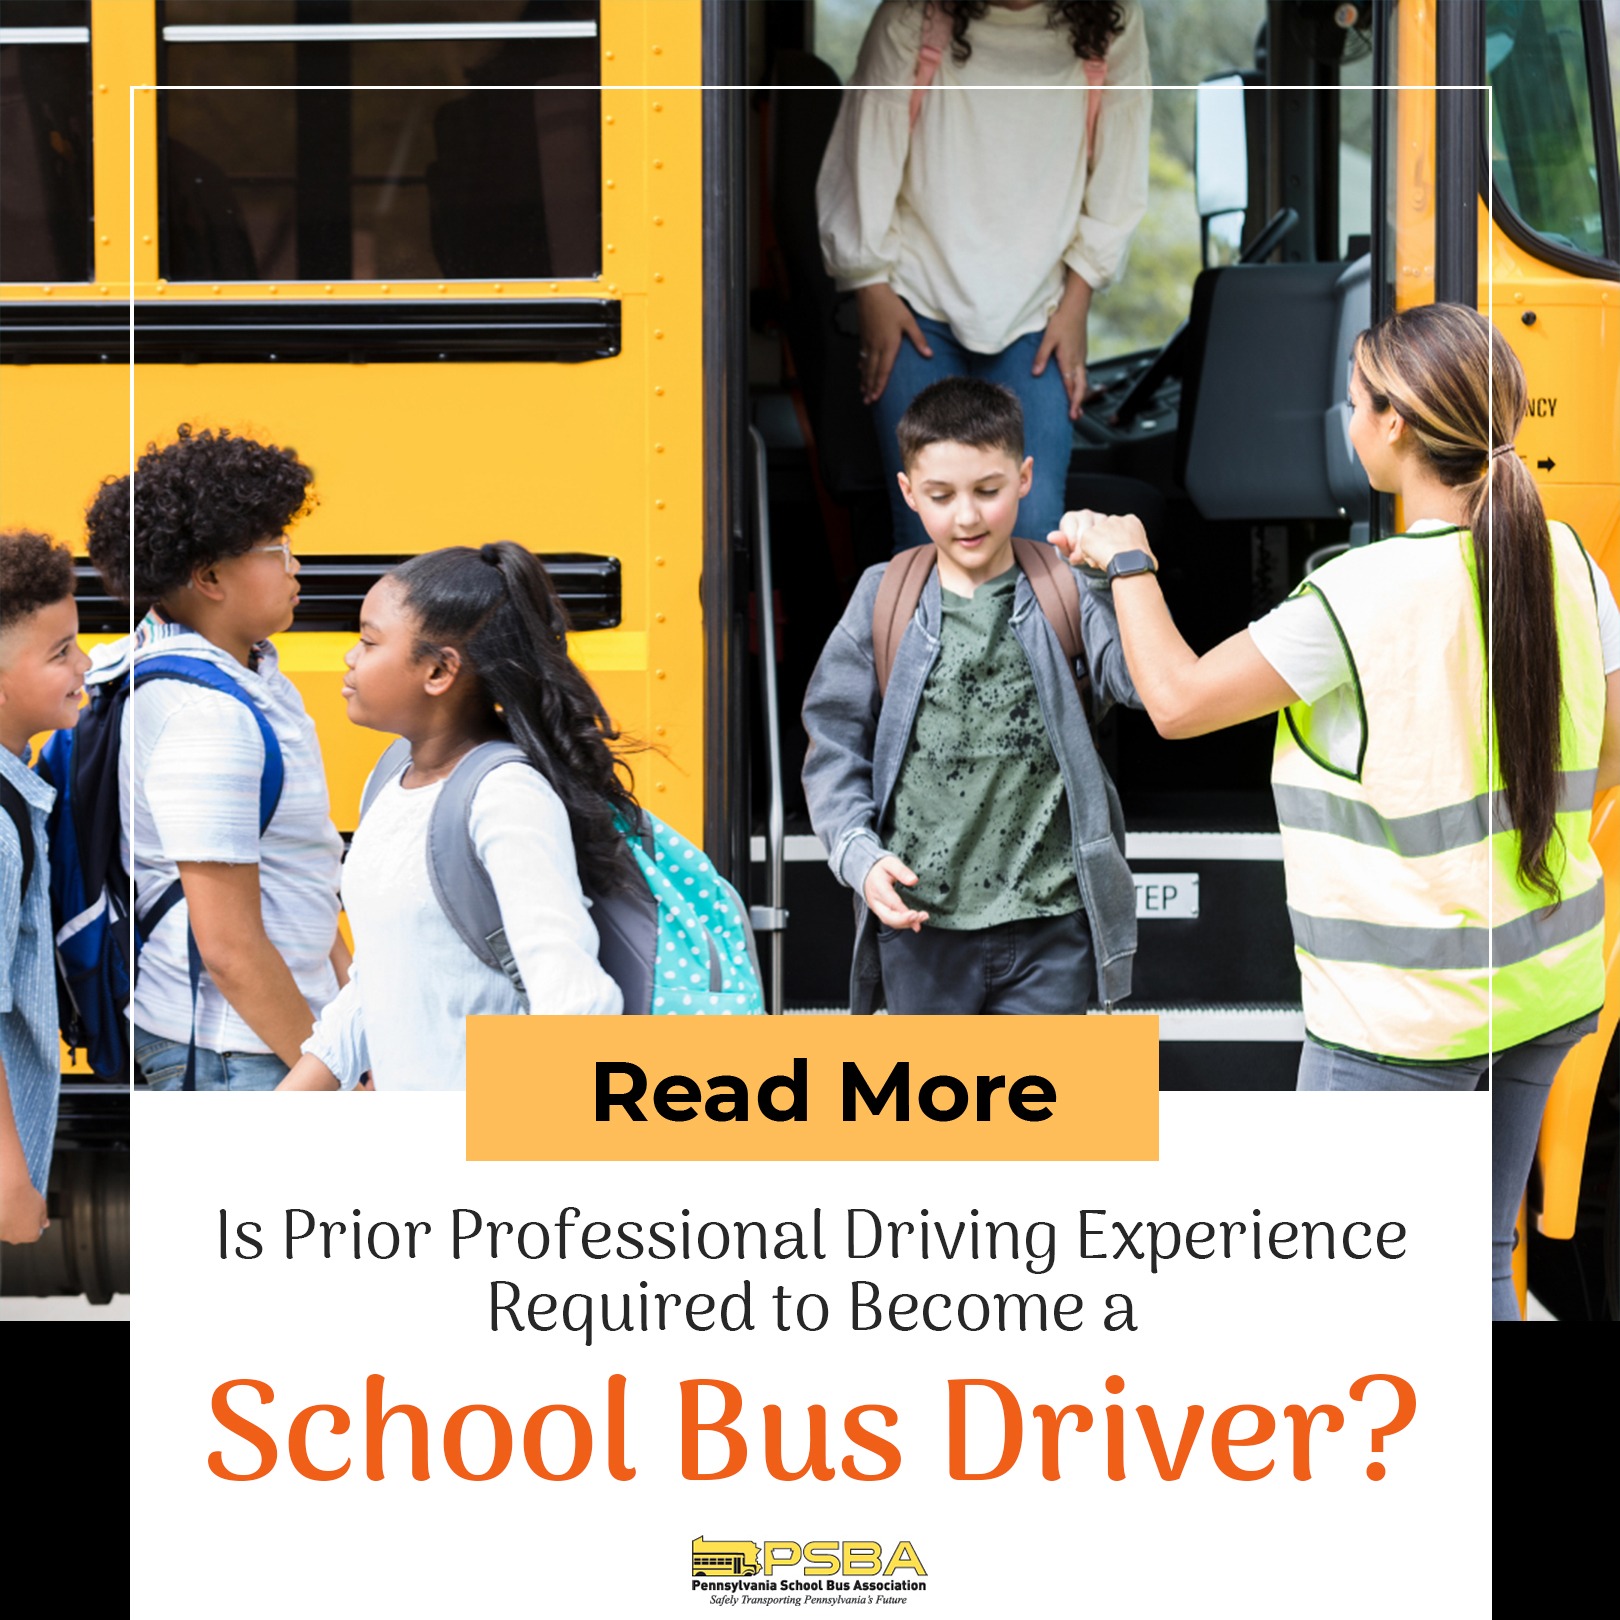 Is Prior Professional Driving Experience Required to Become a School Bus Driver?